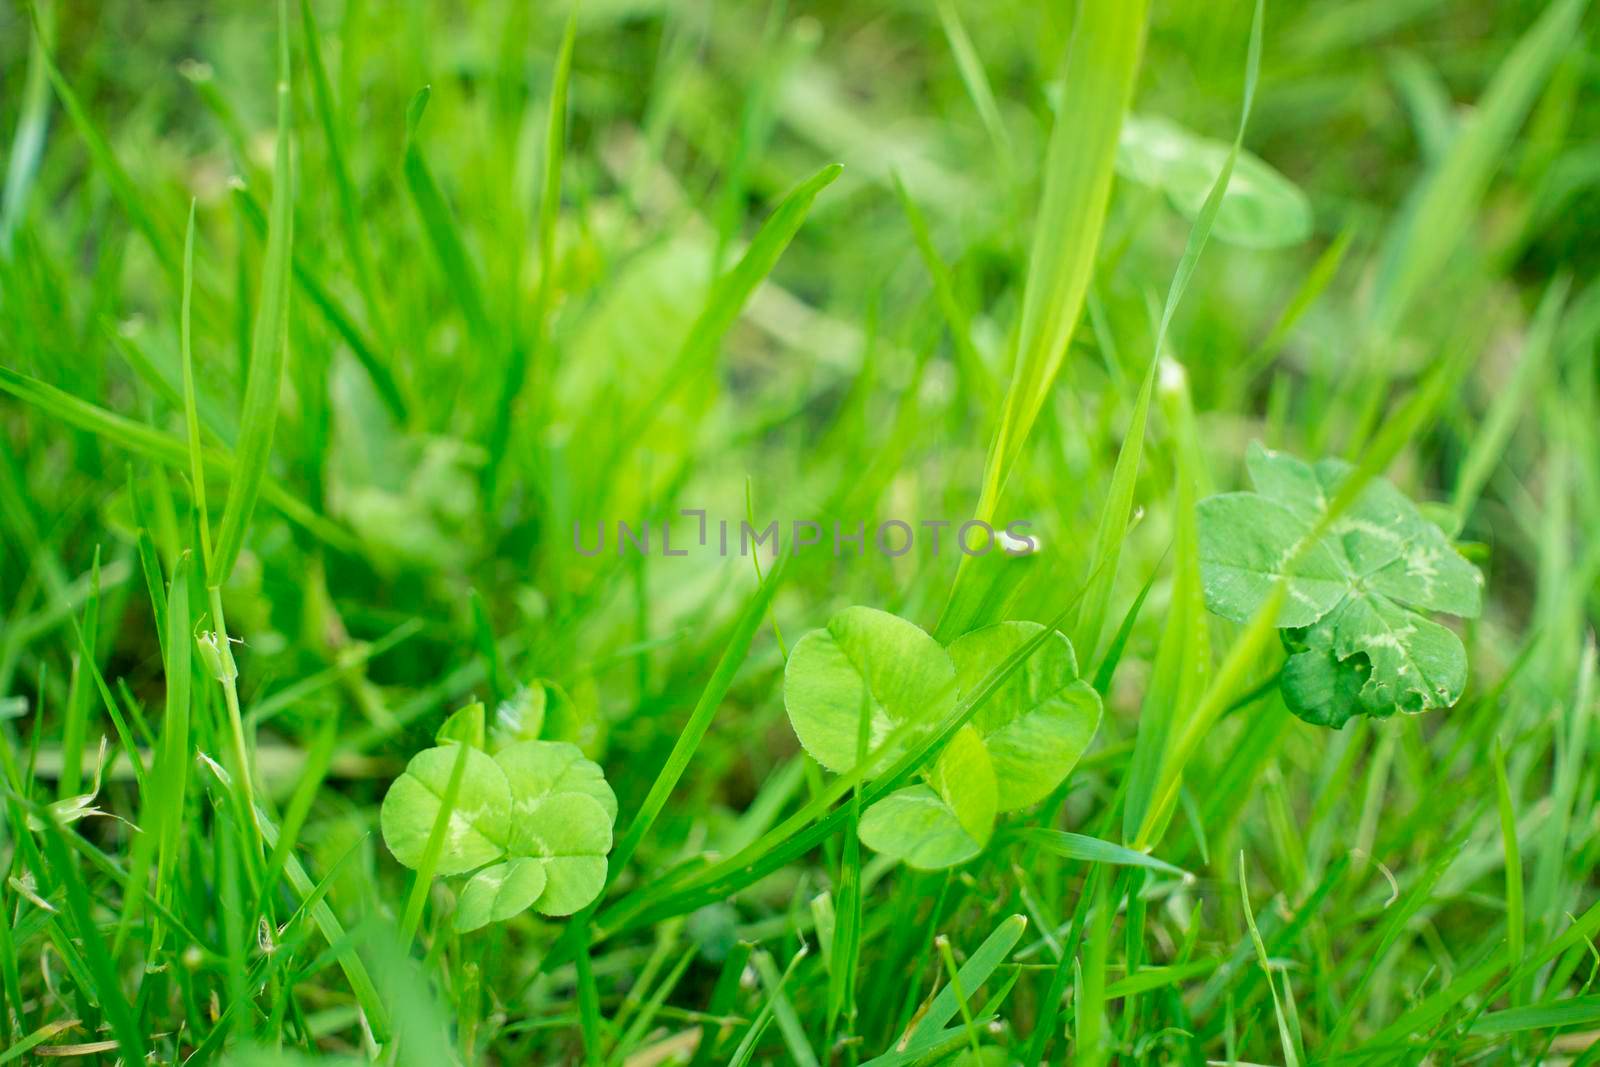 green clover leaves blured background with some parts in focus by kajasja